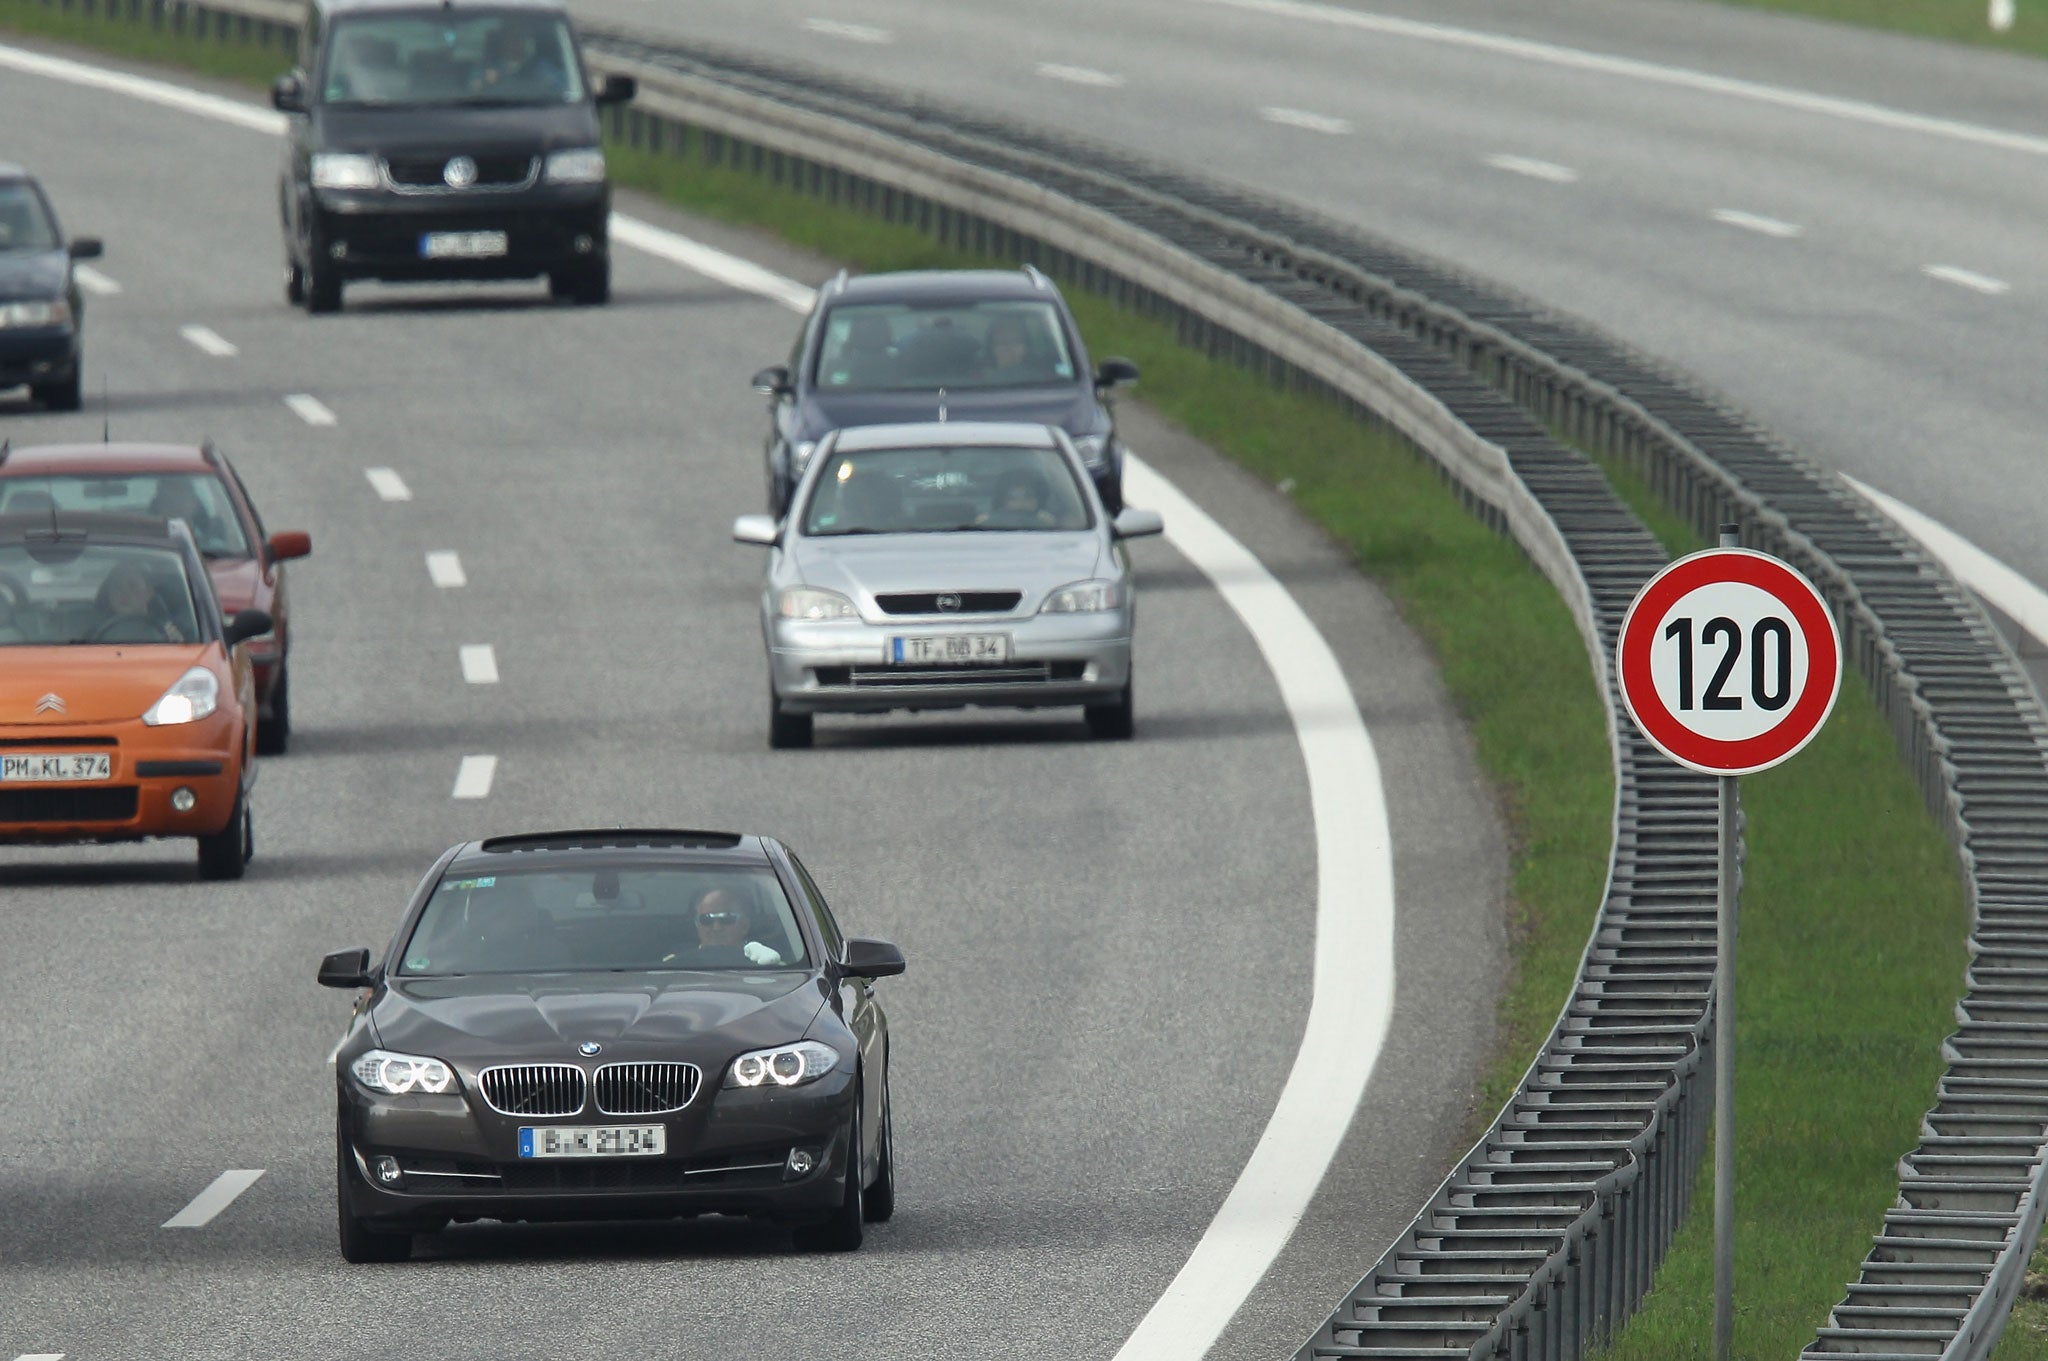 Make sure you’ve got plenty in the tank (or battery) before driving on an Autobahn